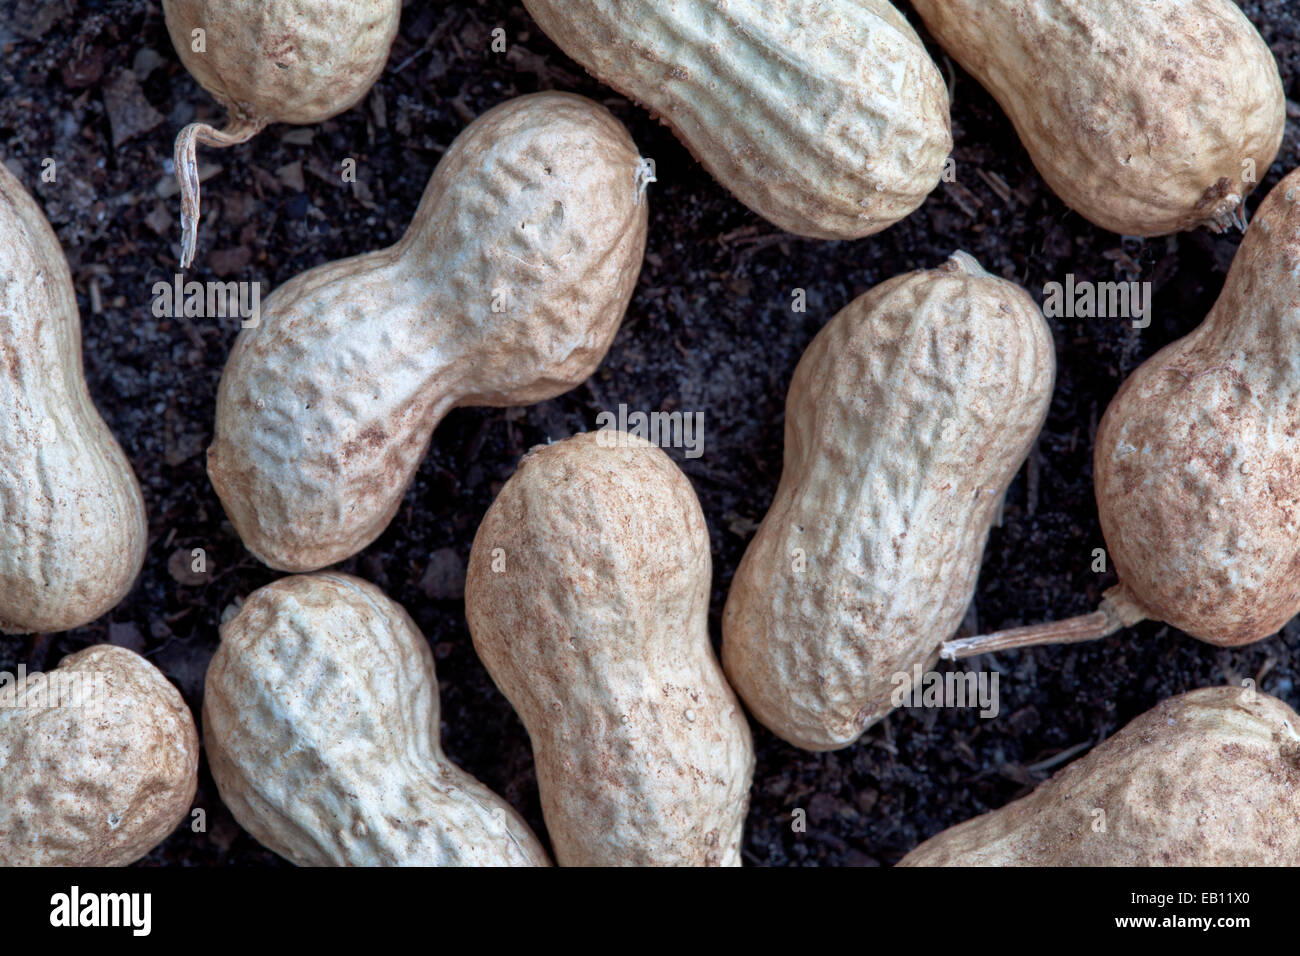 Close-up of harvested  'Spanich' peanuts. Stock Photo